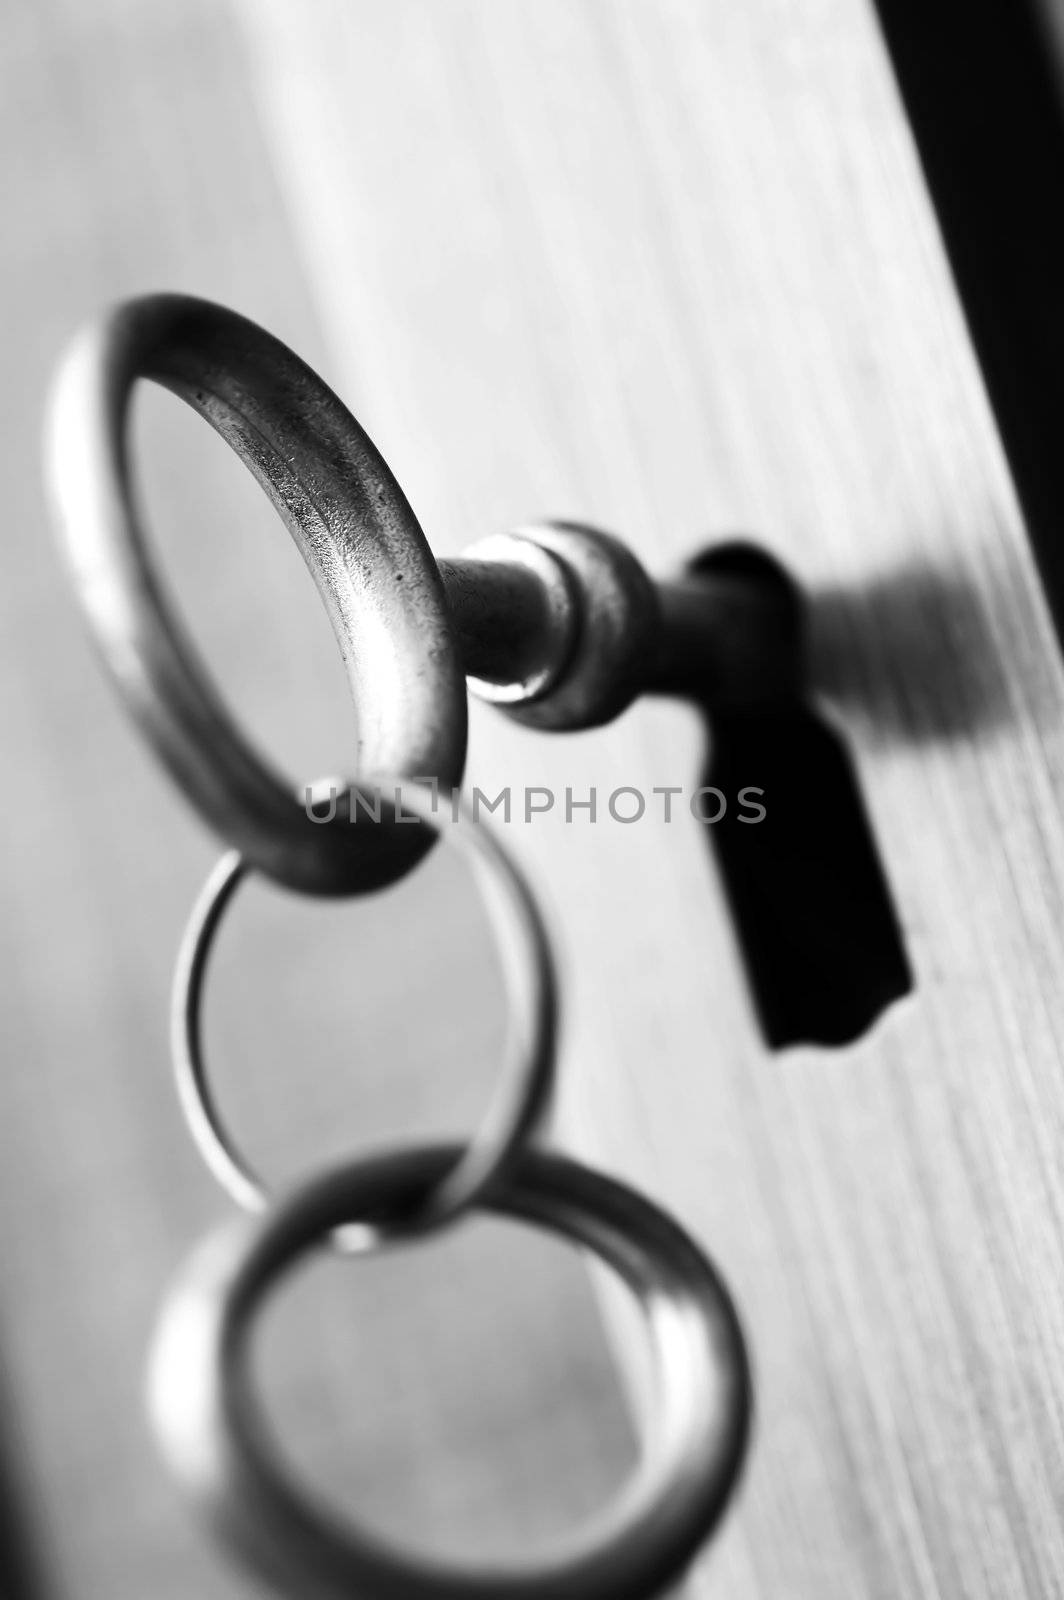 CLOSED - key security by photocreo